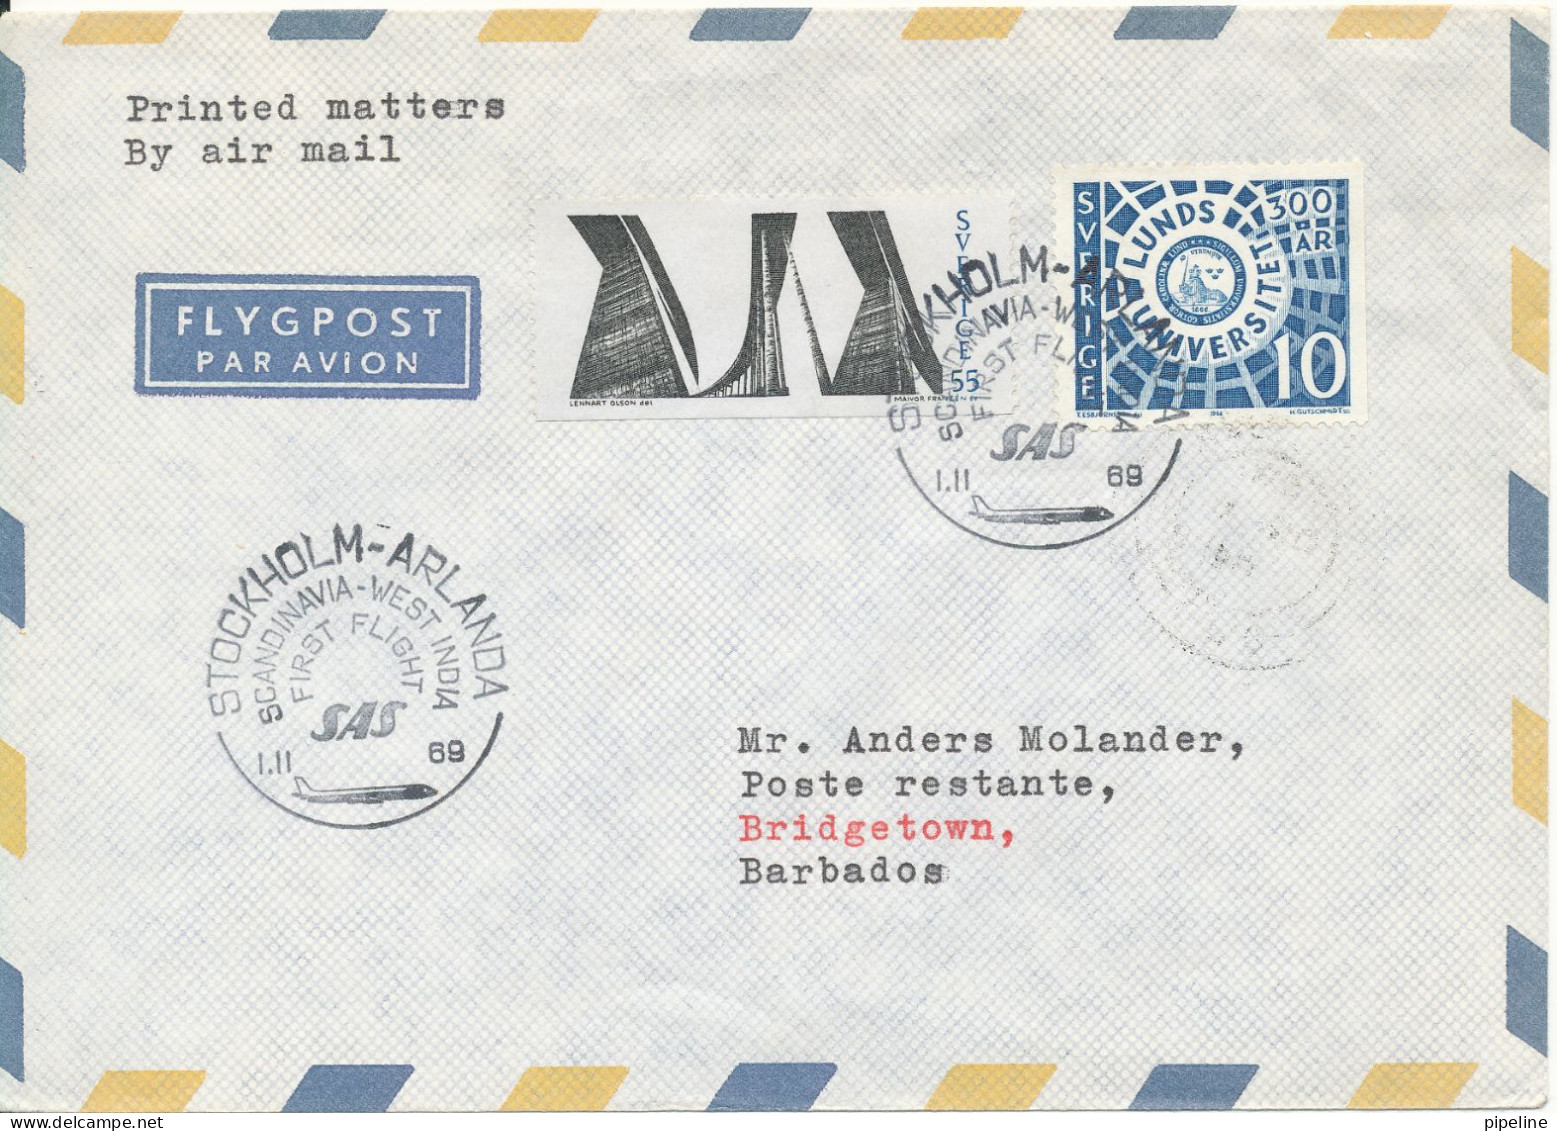 Sweden Air Mail Cover First SAS Flight Scandinavia - West India 1-11-1969 - Covers & Documents